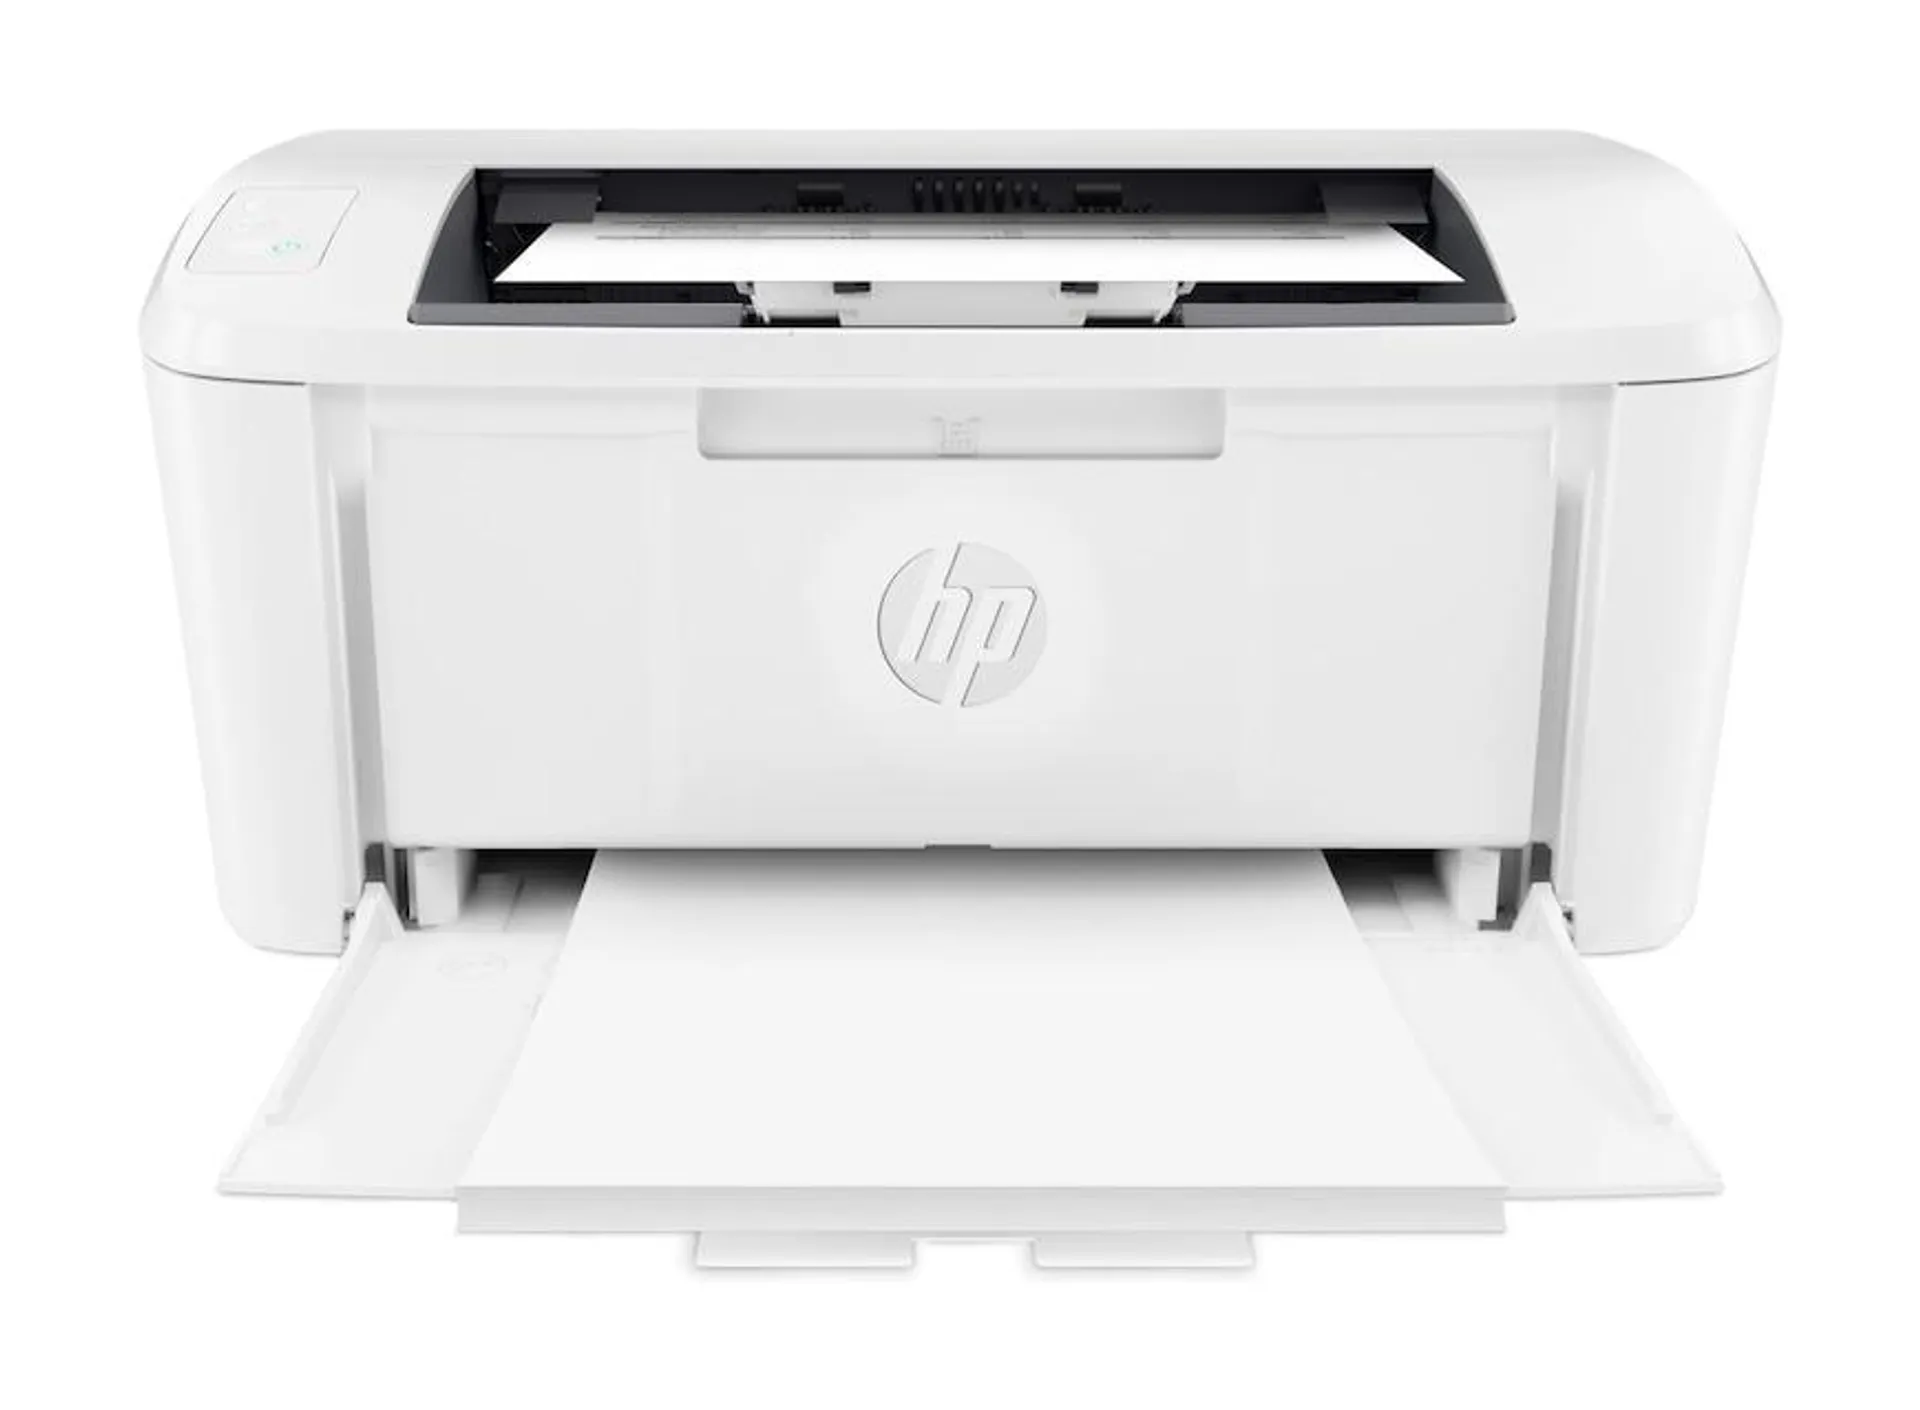 HP LaserJet M110we HP+ enabled Wireless Printer with 6 months Instant Ink